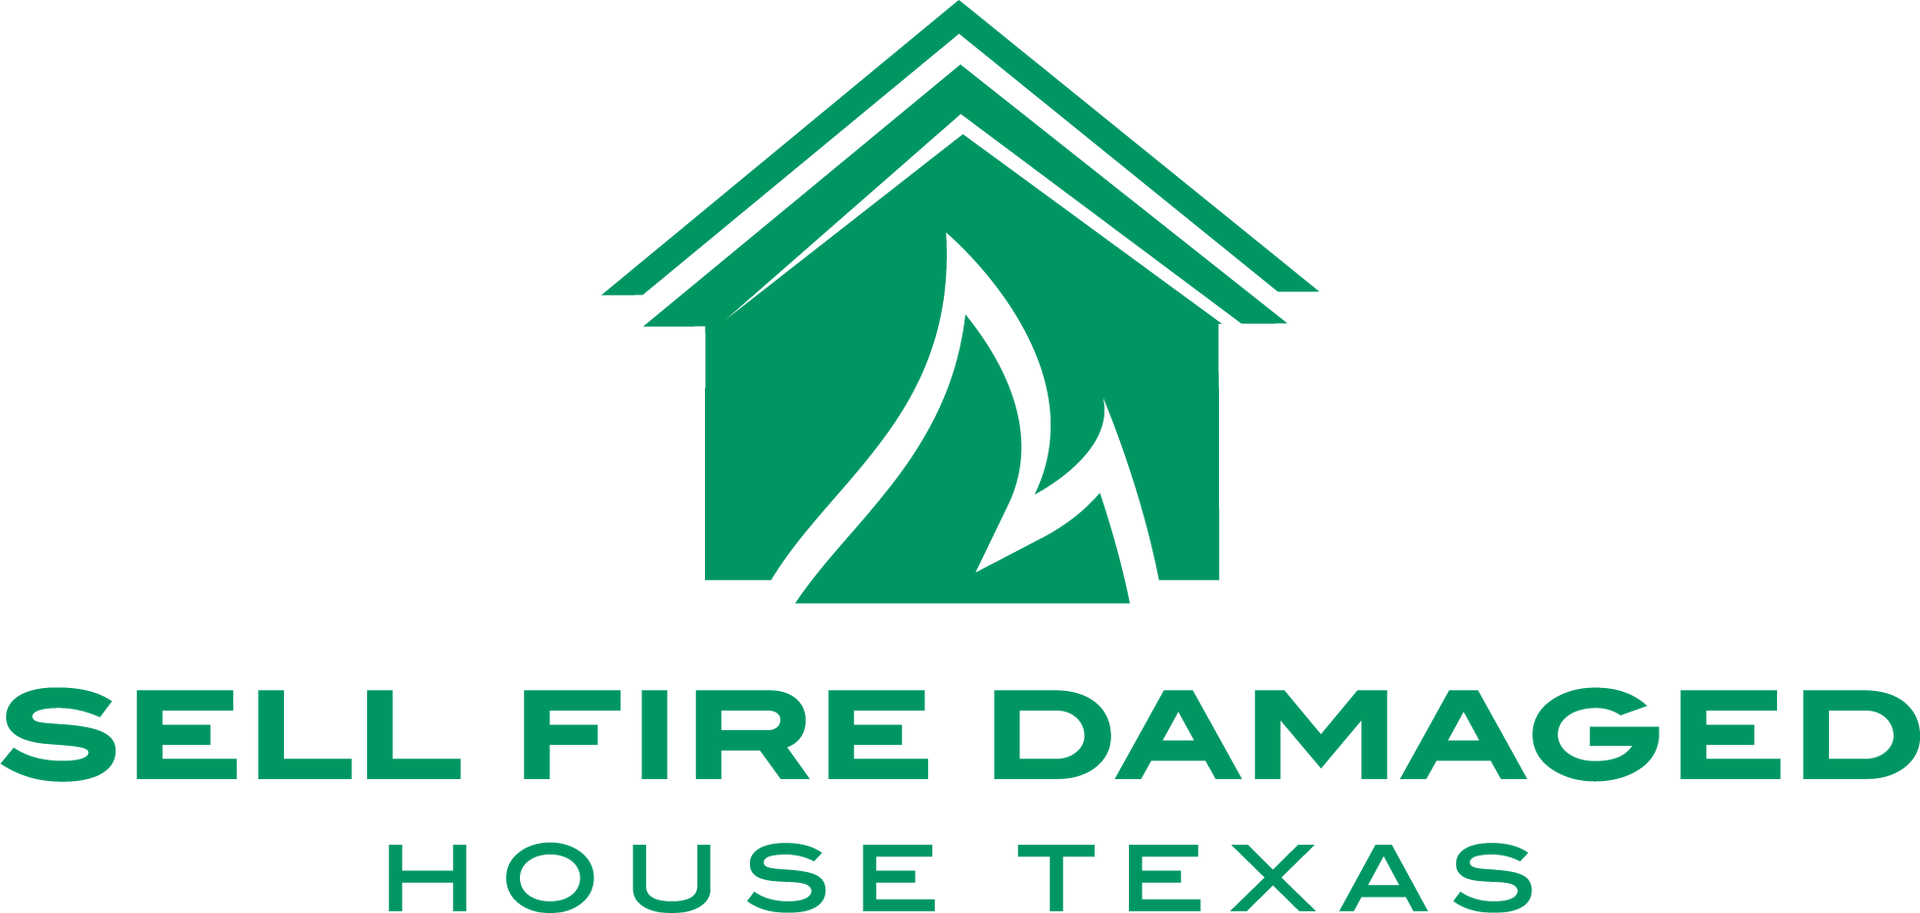 Sell Fire Damaged House Texas